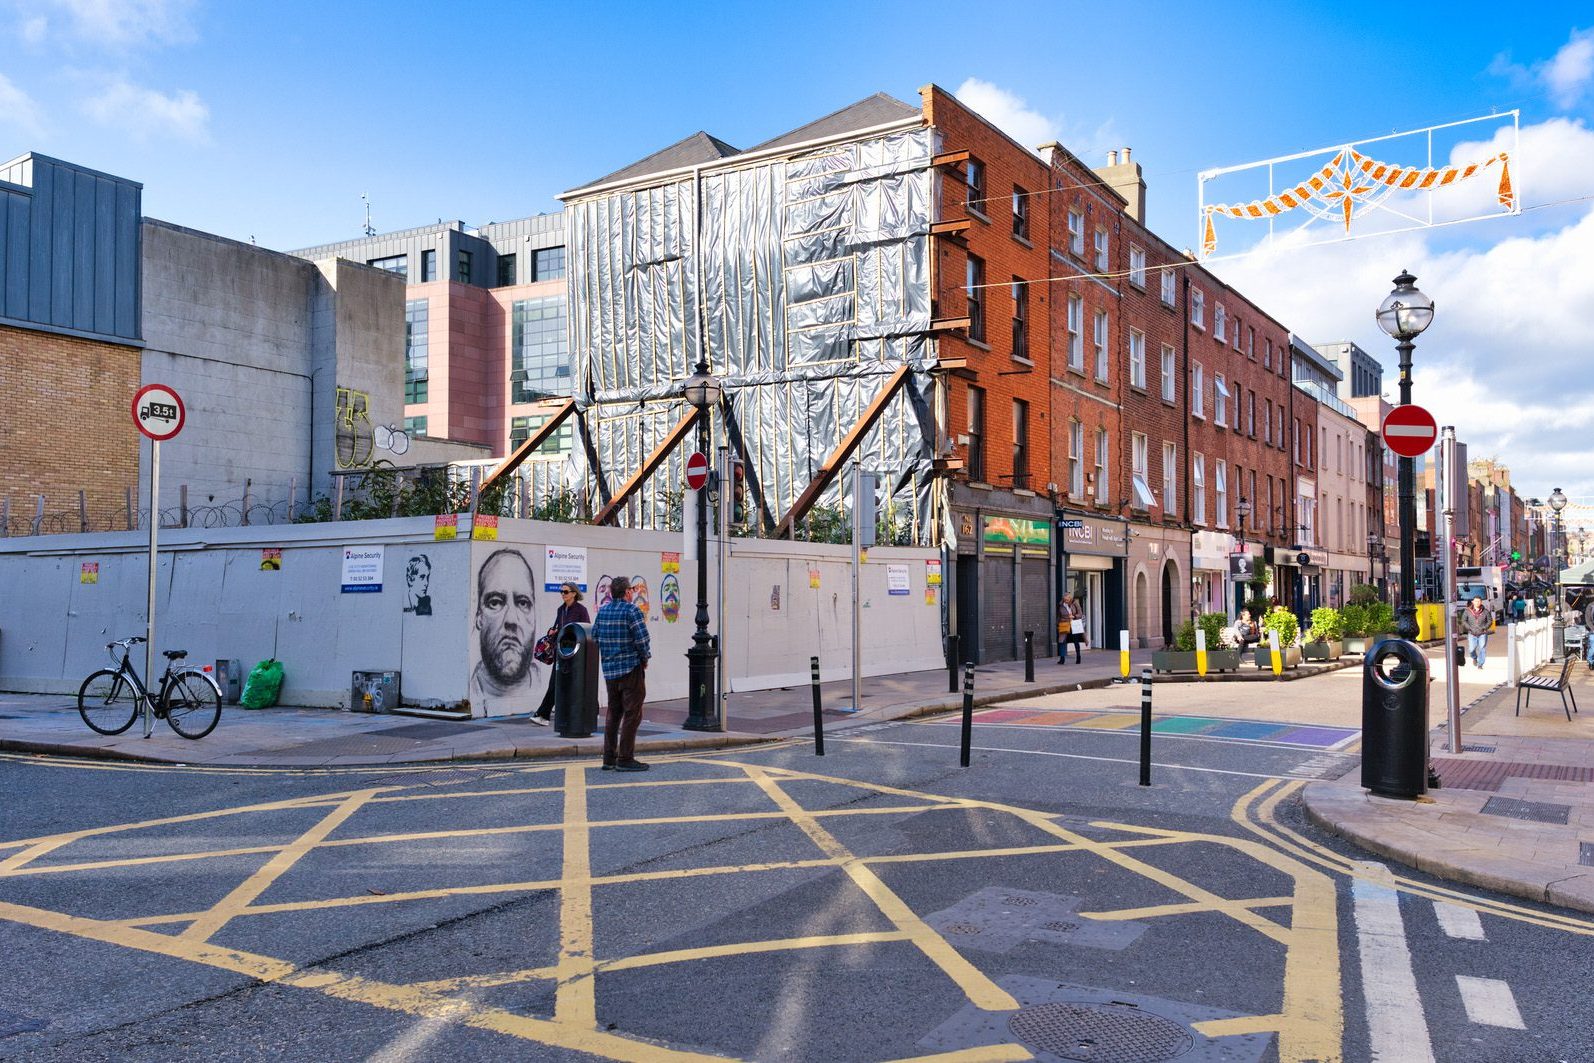 THE CONSTRUCTION OF A NINE STOREY APARTMENT HOTEL [IS ABOUT TO BEGIN ON CAPEL STREET]